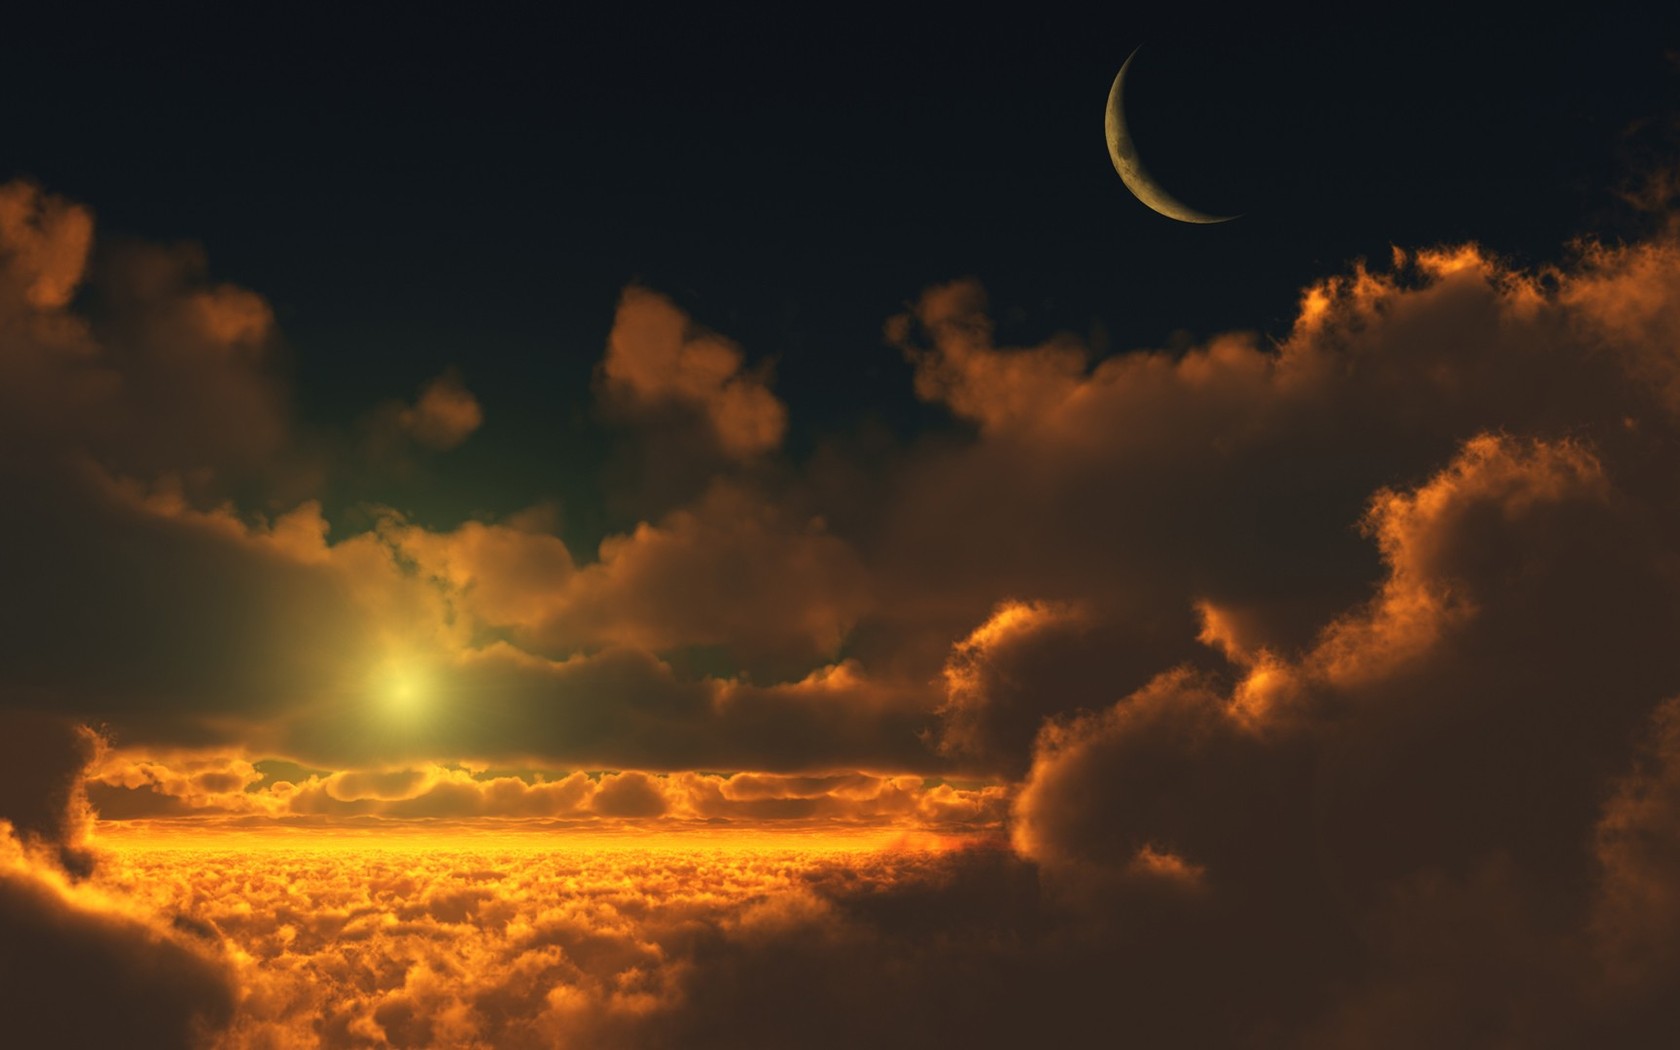 Sunset And Moonrise Wallpaper